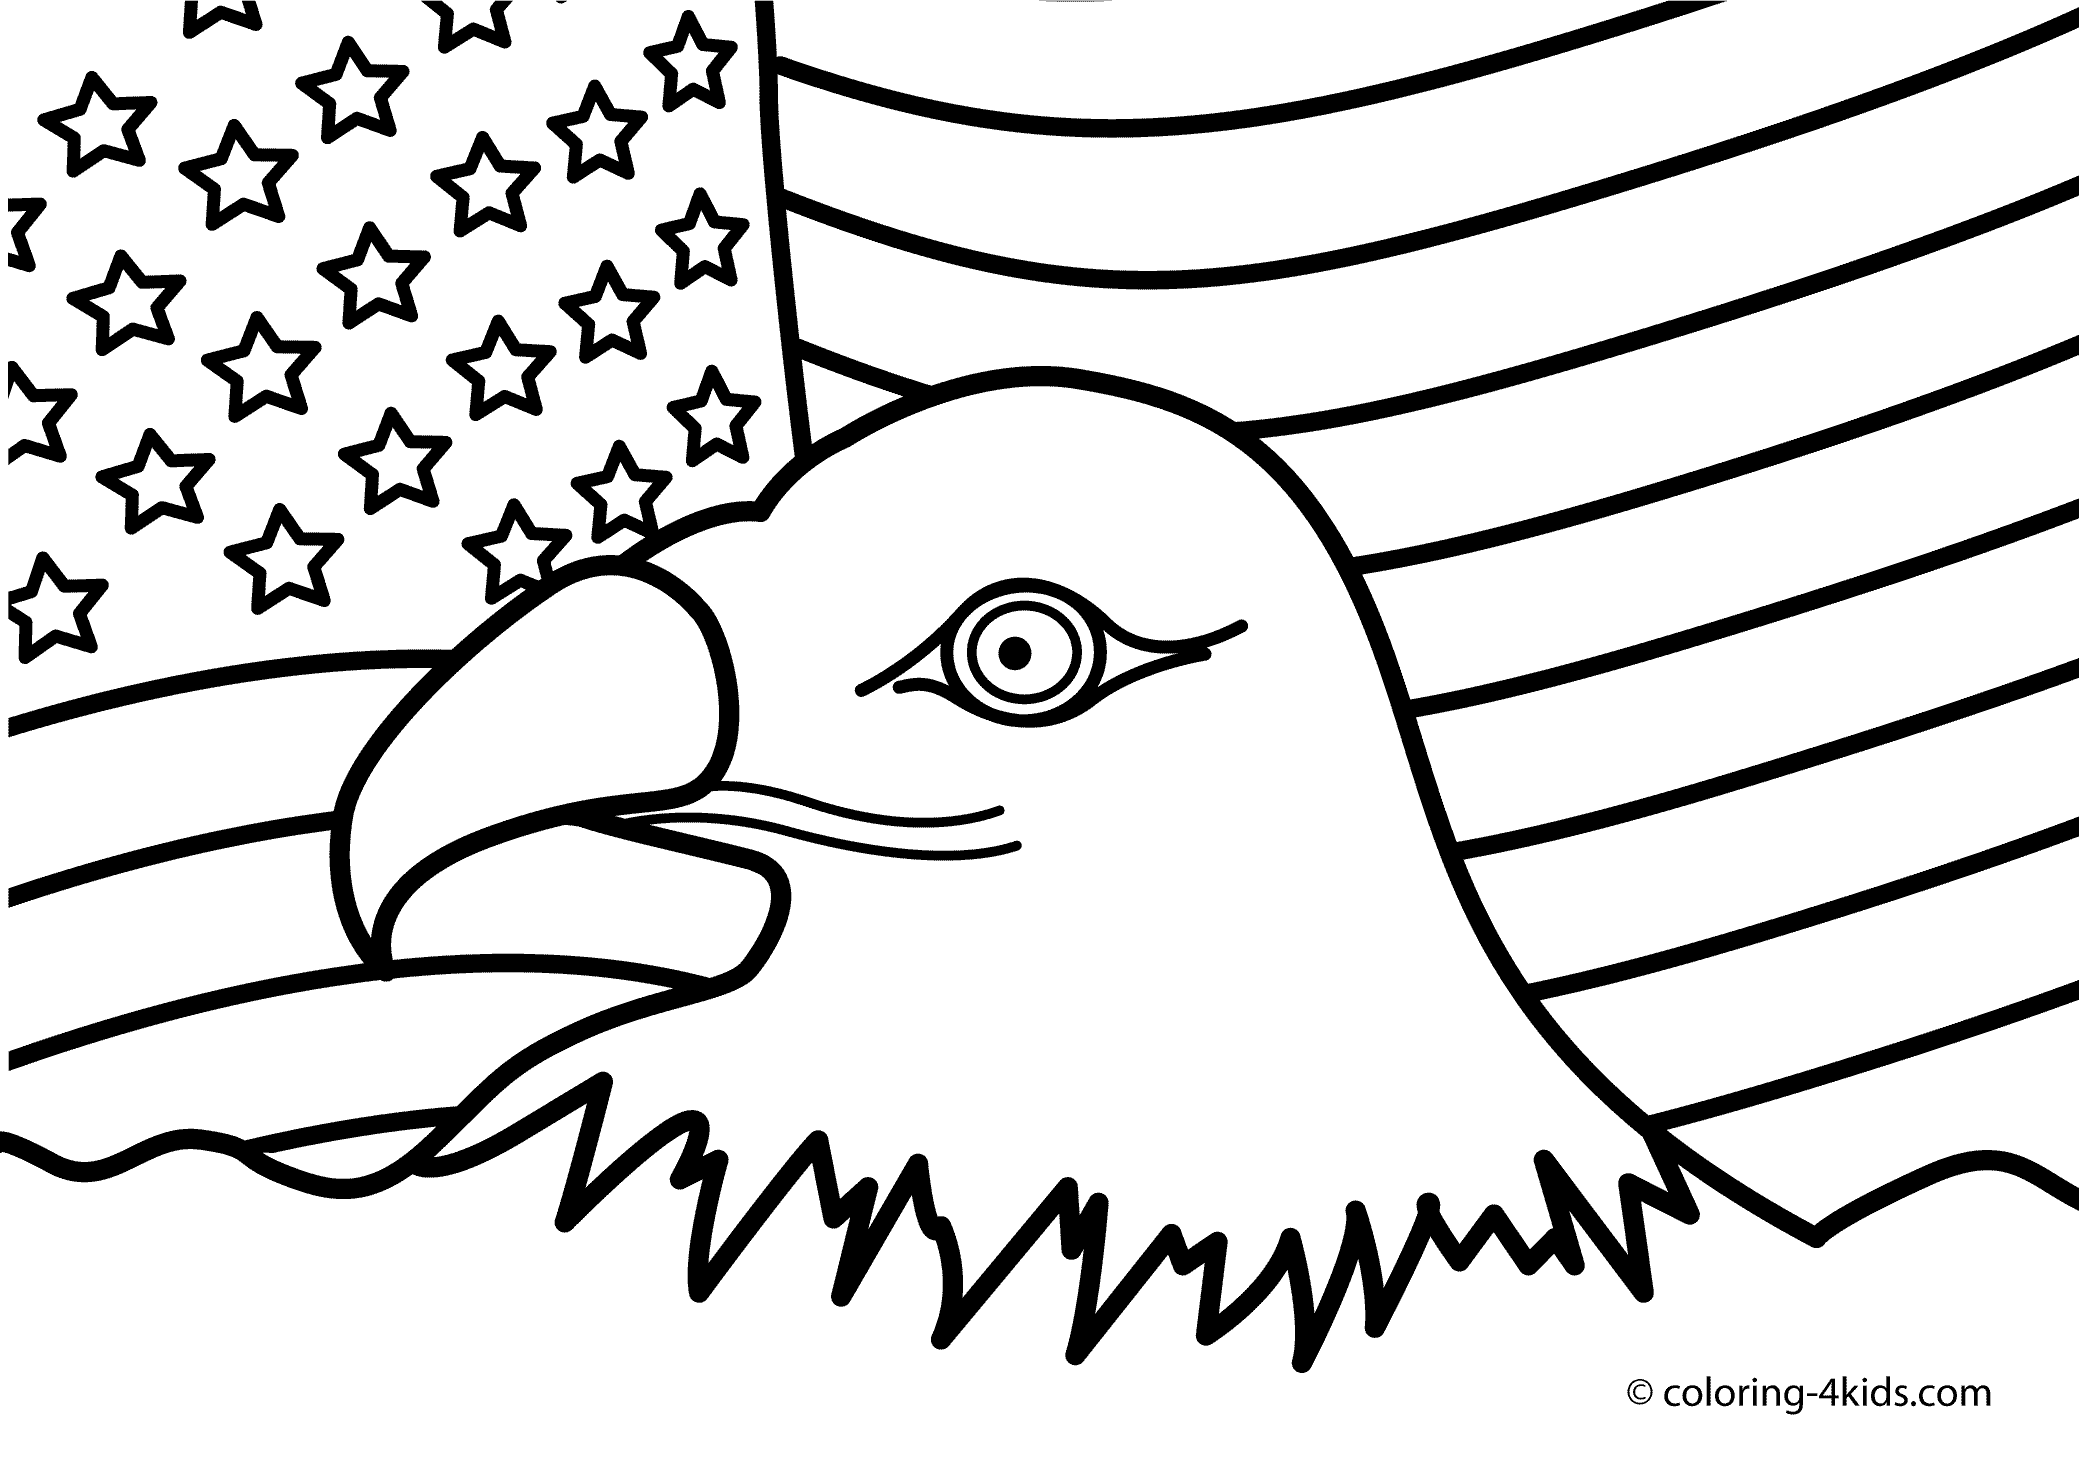 usa coloring pages usa coloring pages to download and print for free pages usa coloring 